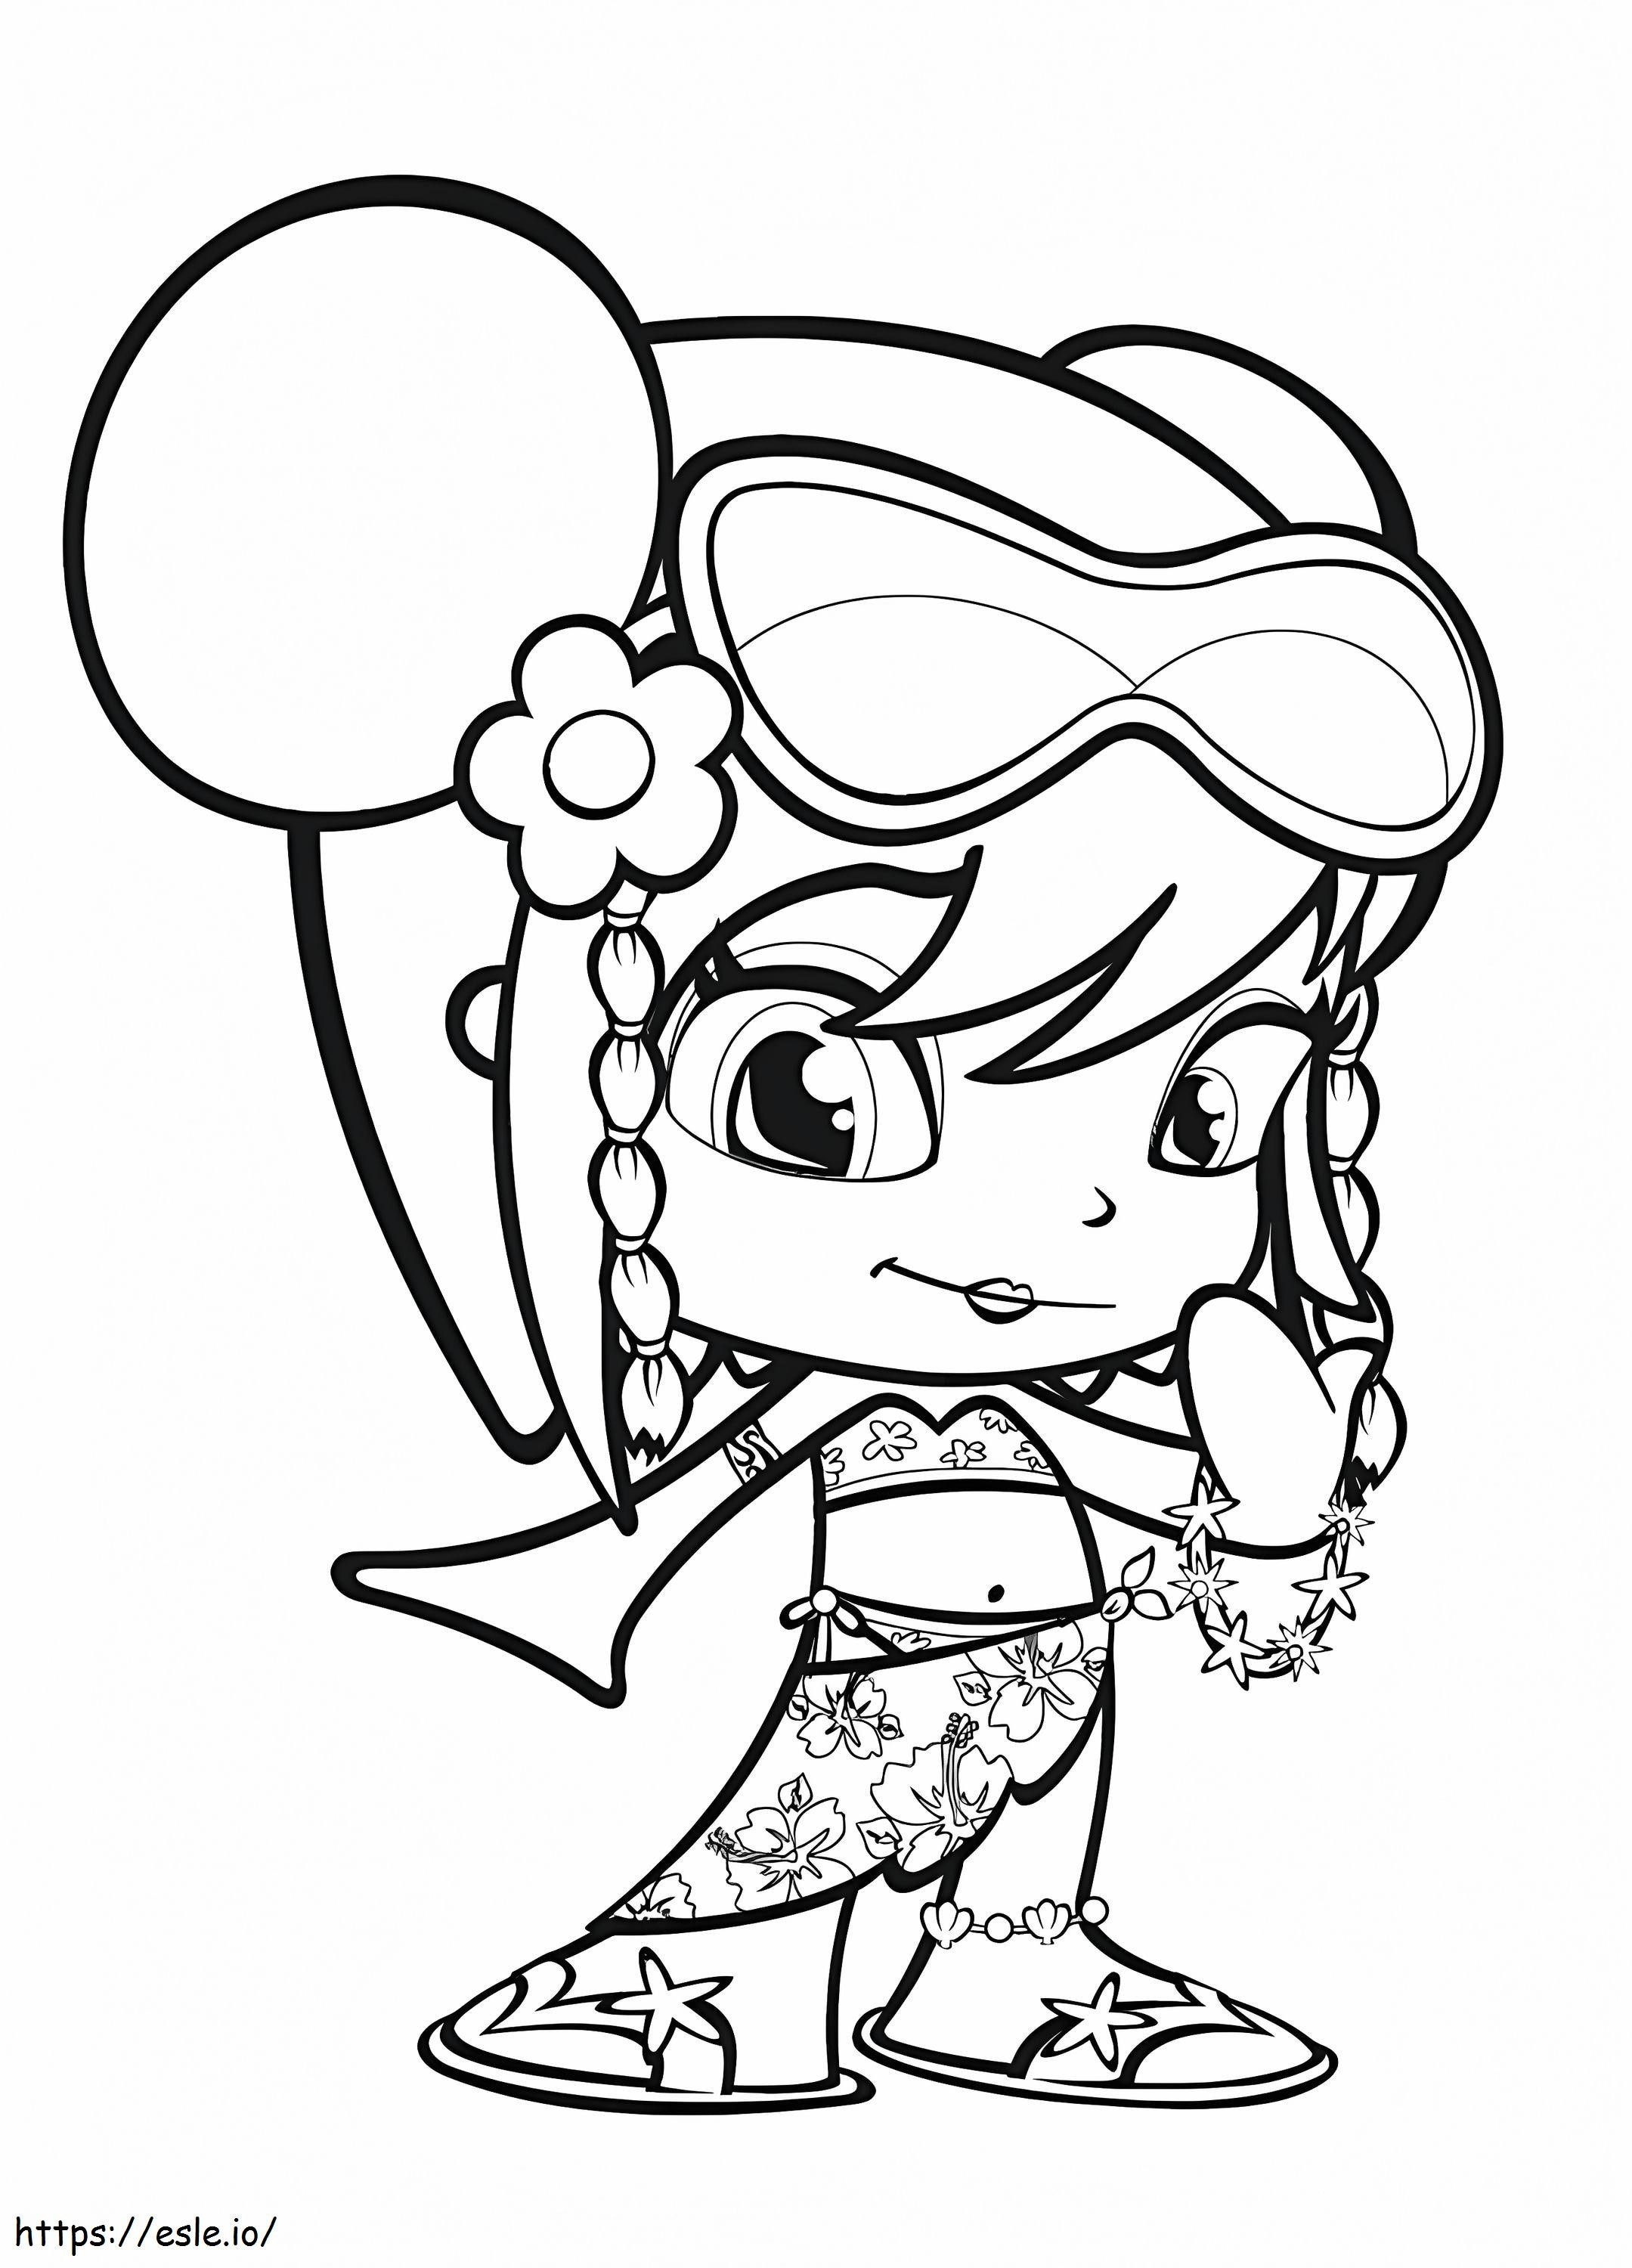 Pretty Pinypon coloring page